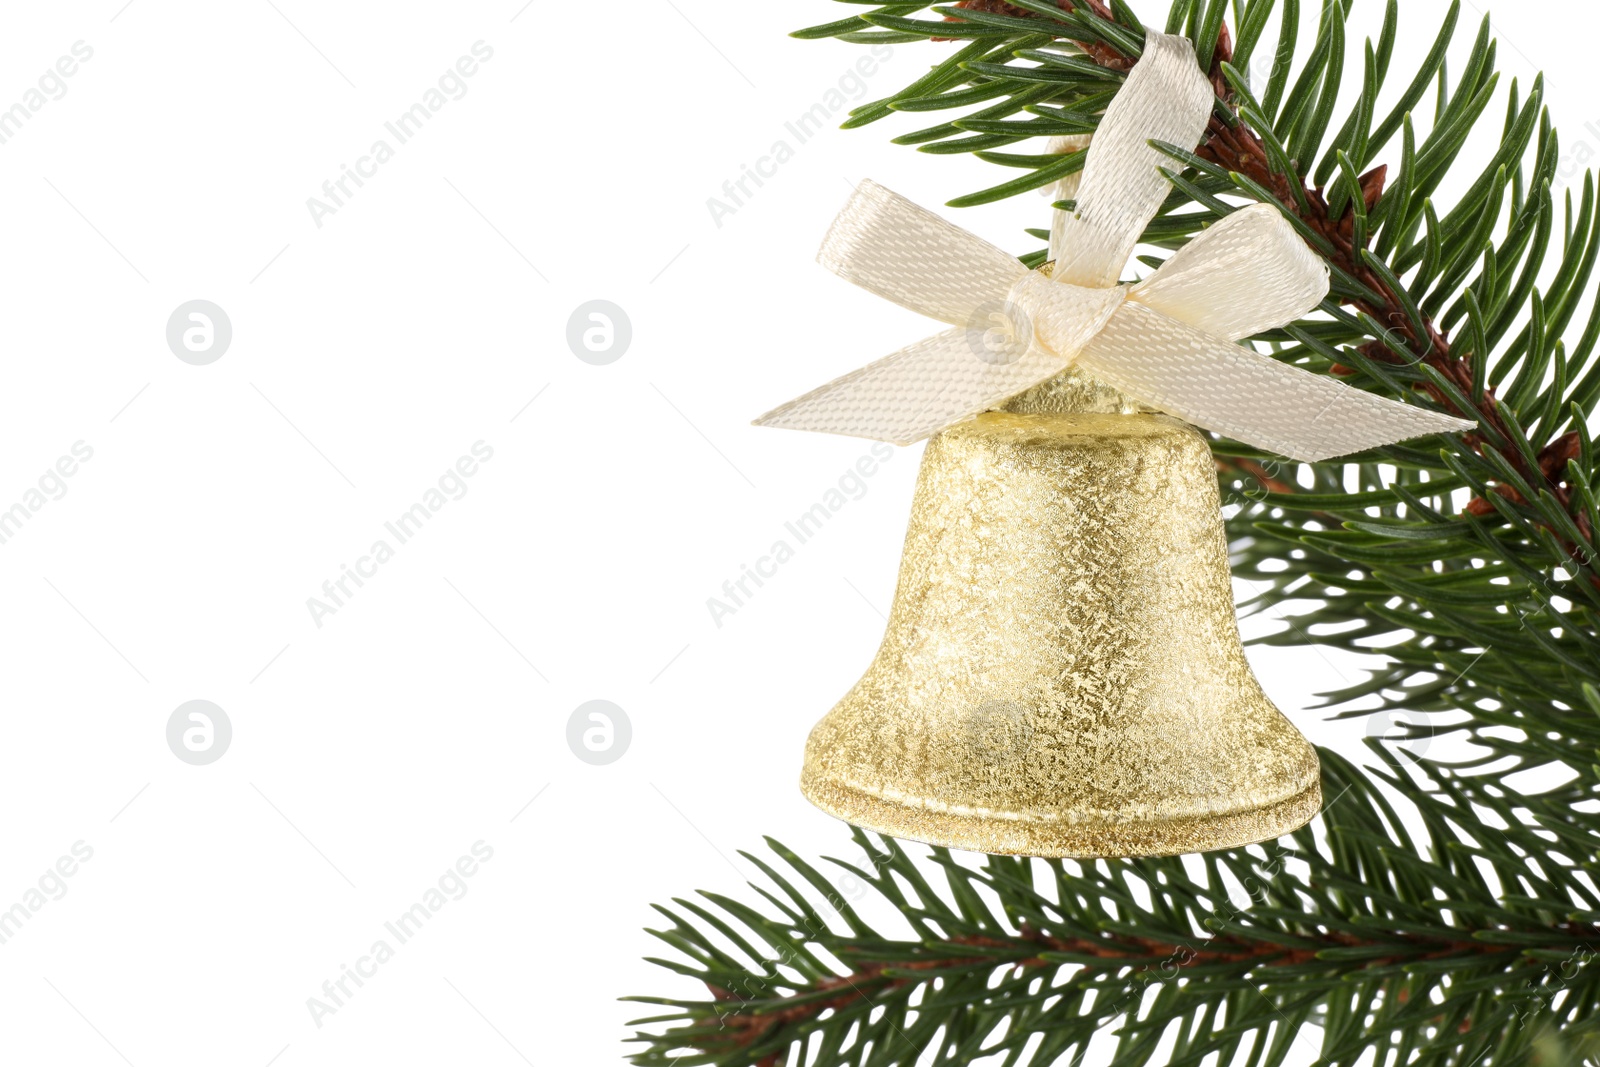 Photo of Christmas bell with bow hanging on fir tree branch against white background